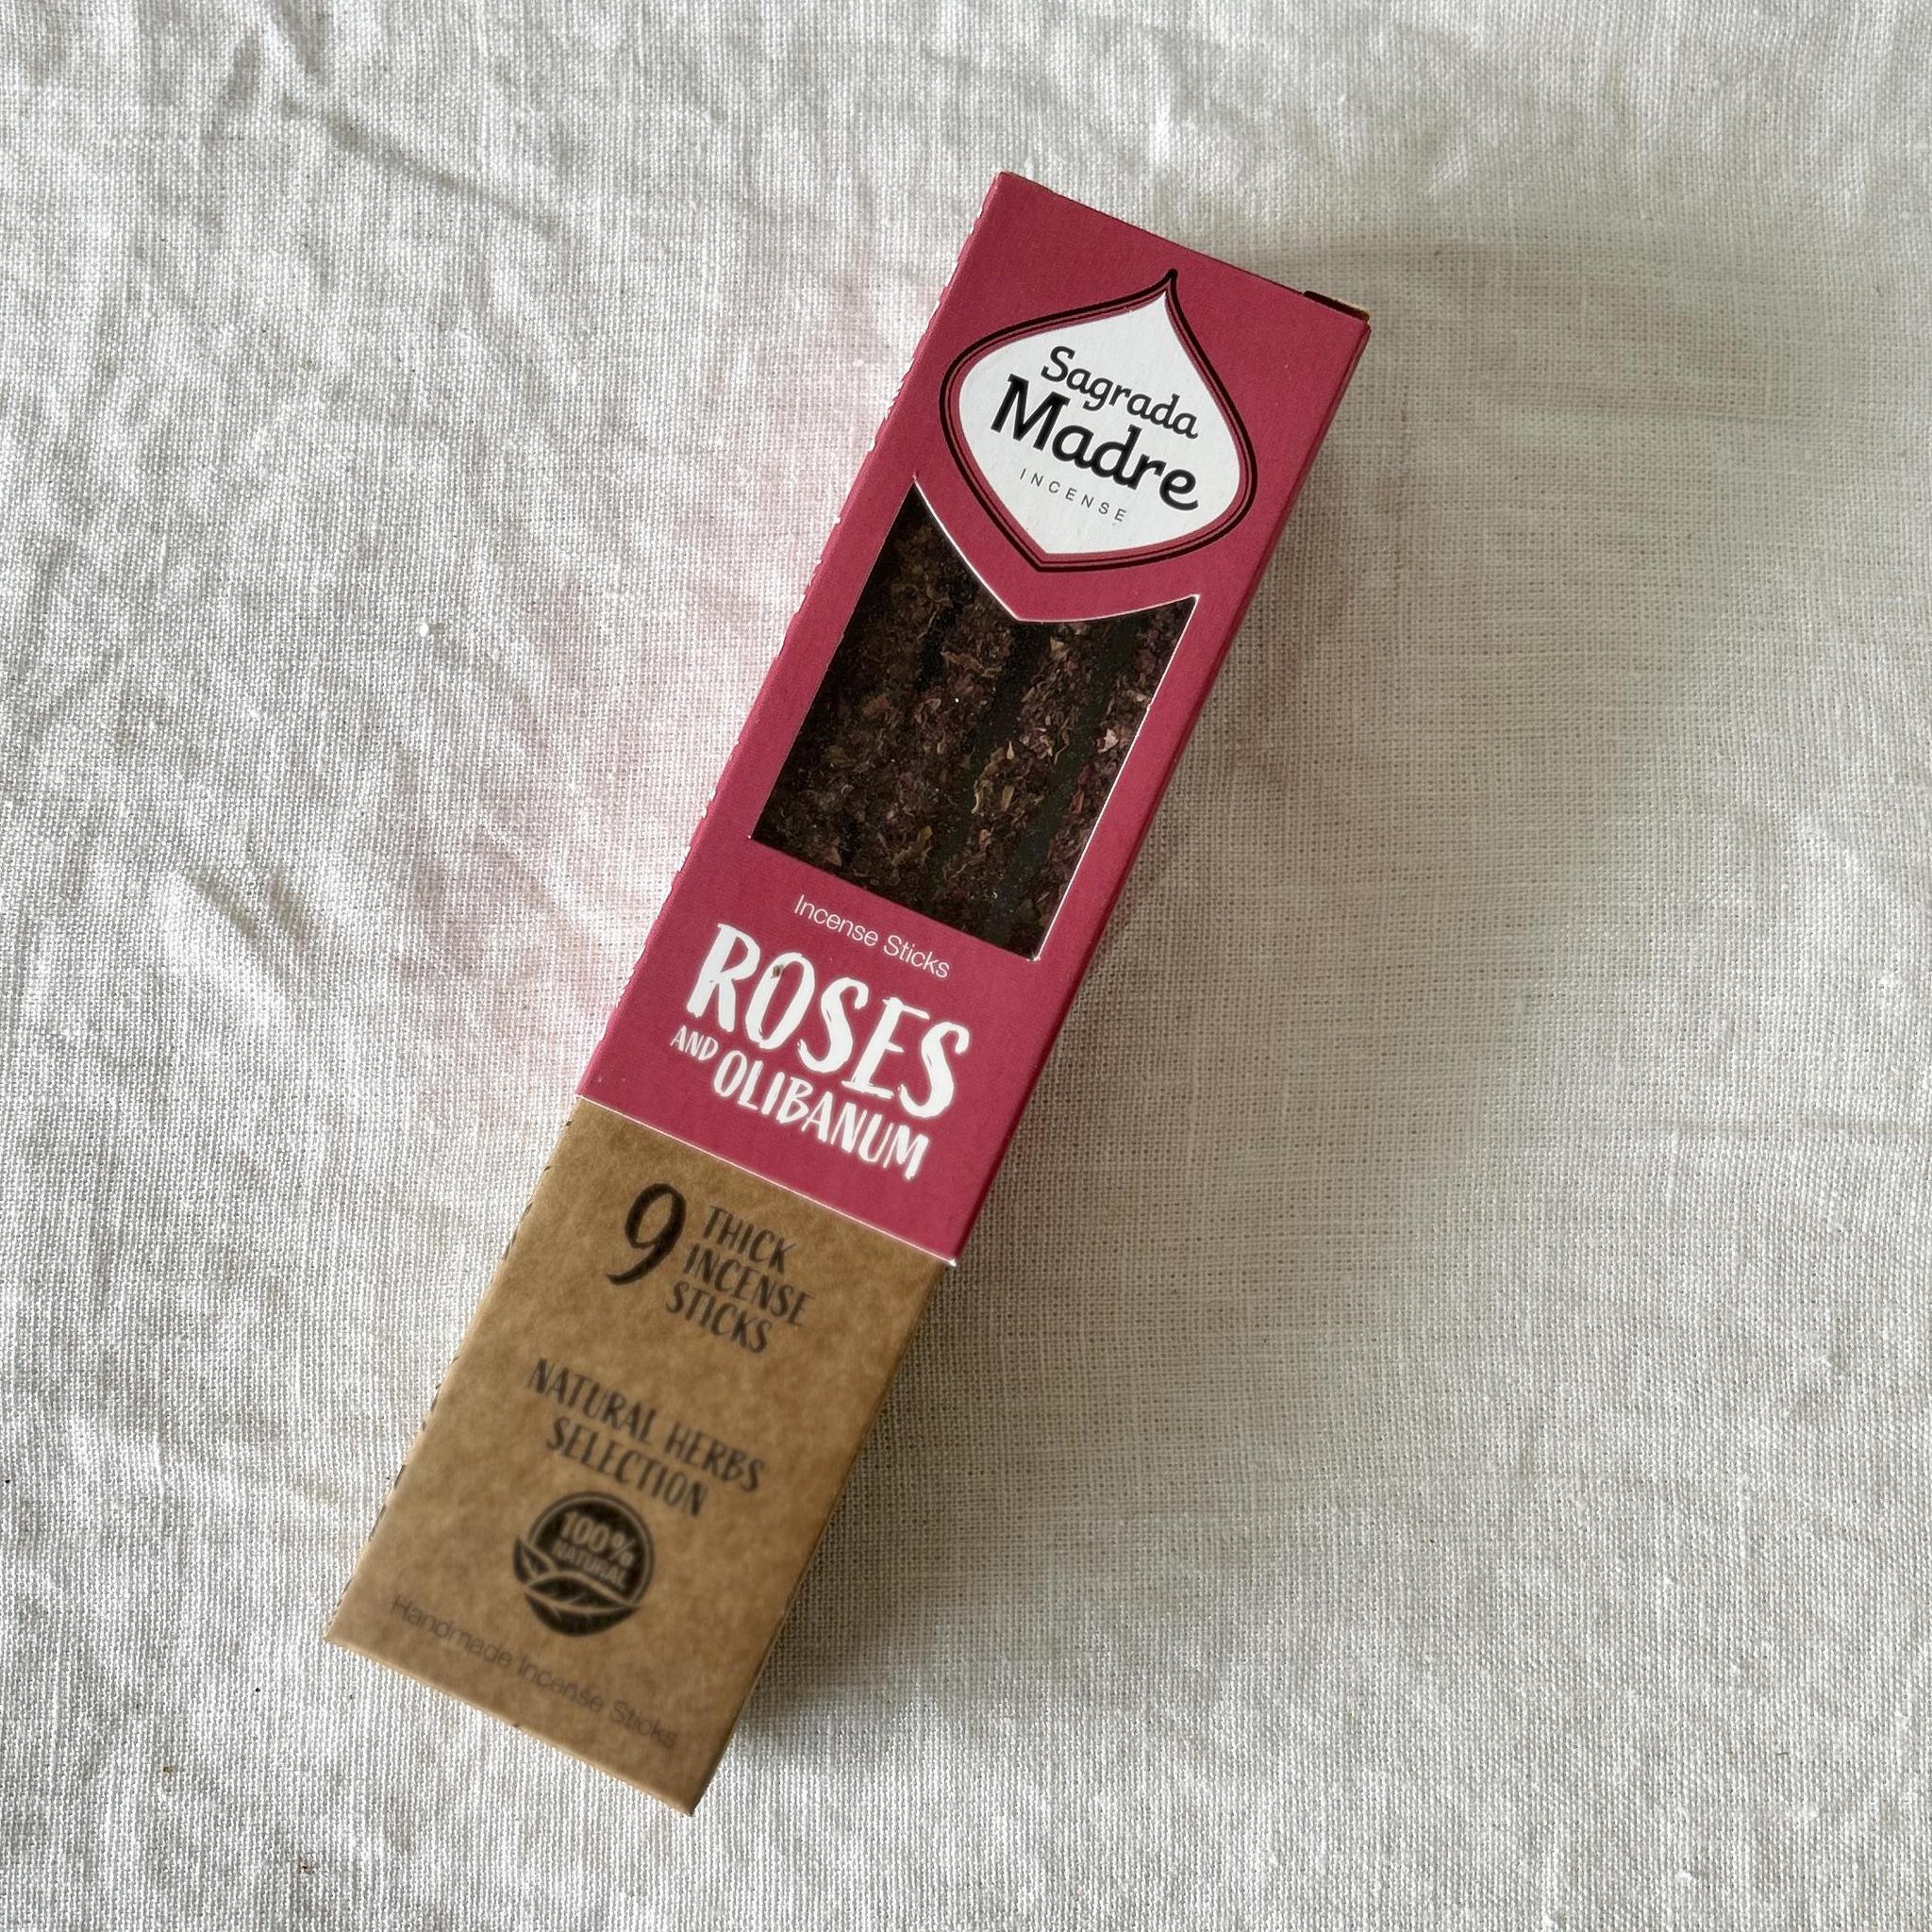 Roses and Olibanum Incense Sticks. Each stick is hand formed around an Olibanum (Frankincense) resin base then carefully packed with whole flowers, herbs and/or petals. Leaving a gorgeously decorated incense stick that is as impressive to see as it is to smell.